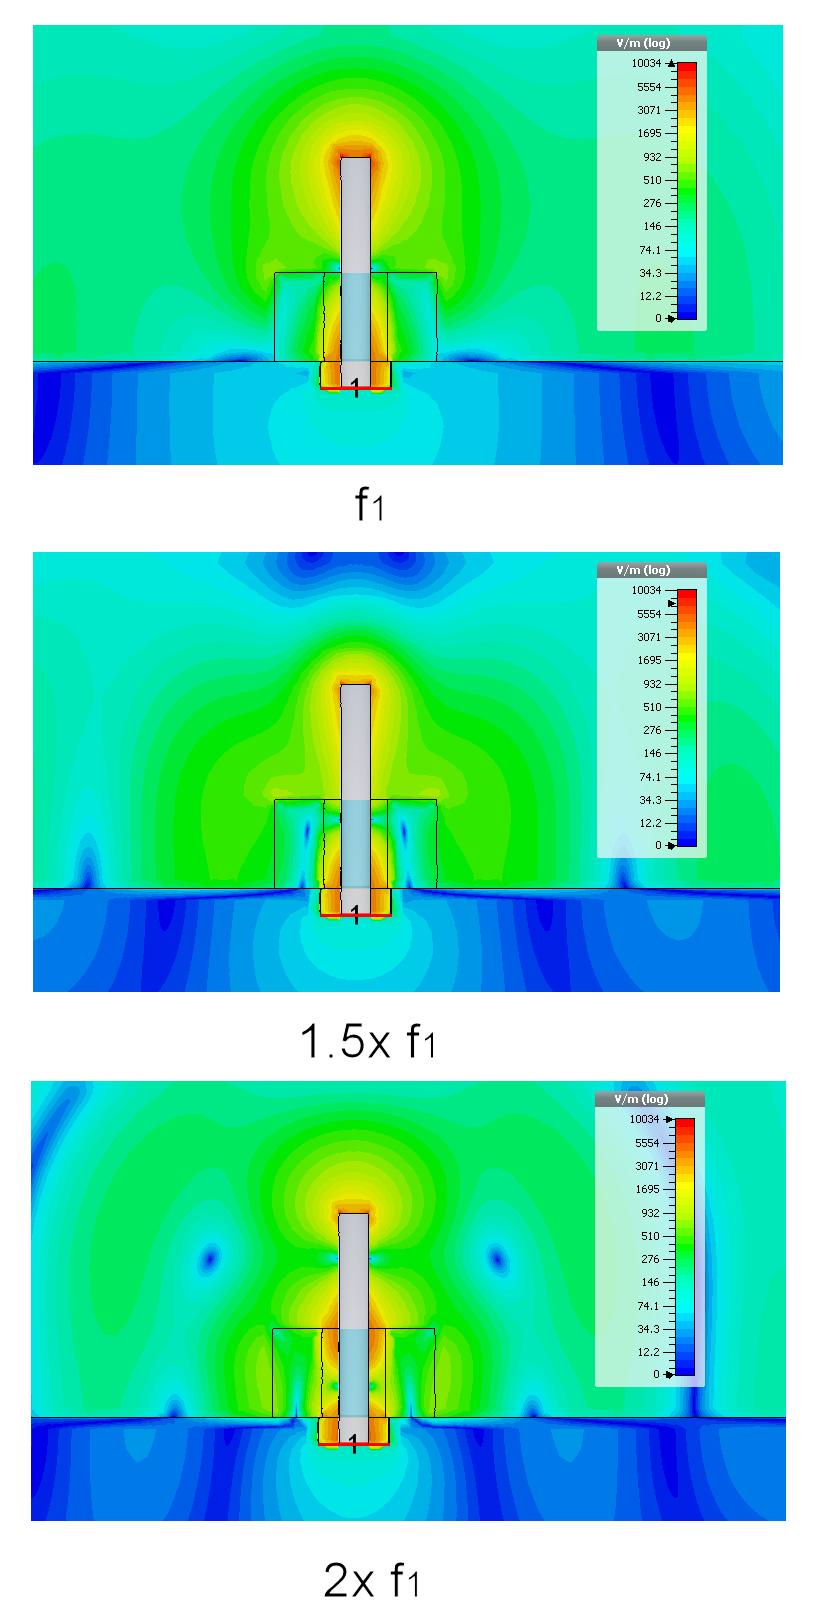 The middle resonance (f2) is achieved by the DRA effectively loading the monopole so that it achieves the current distribution of a slightly shorter monopole.